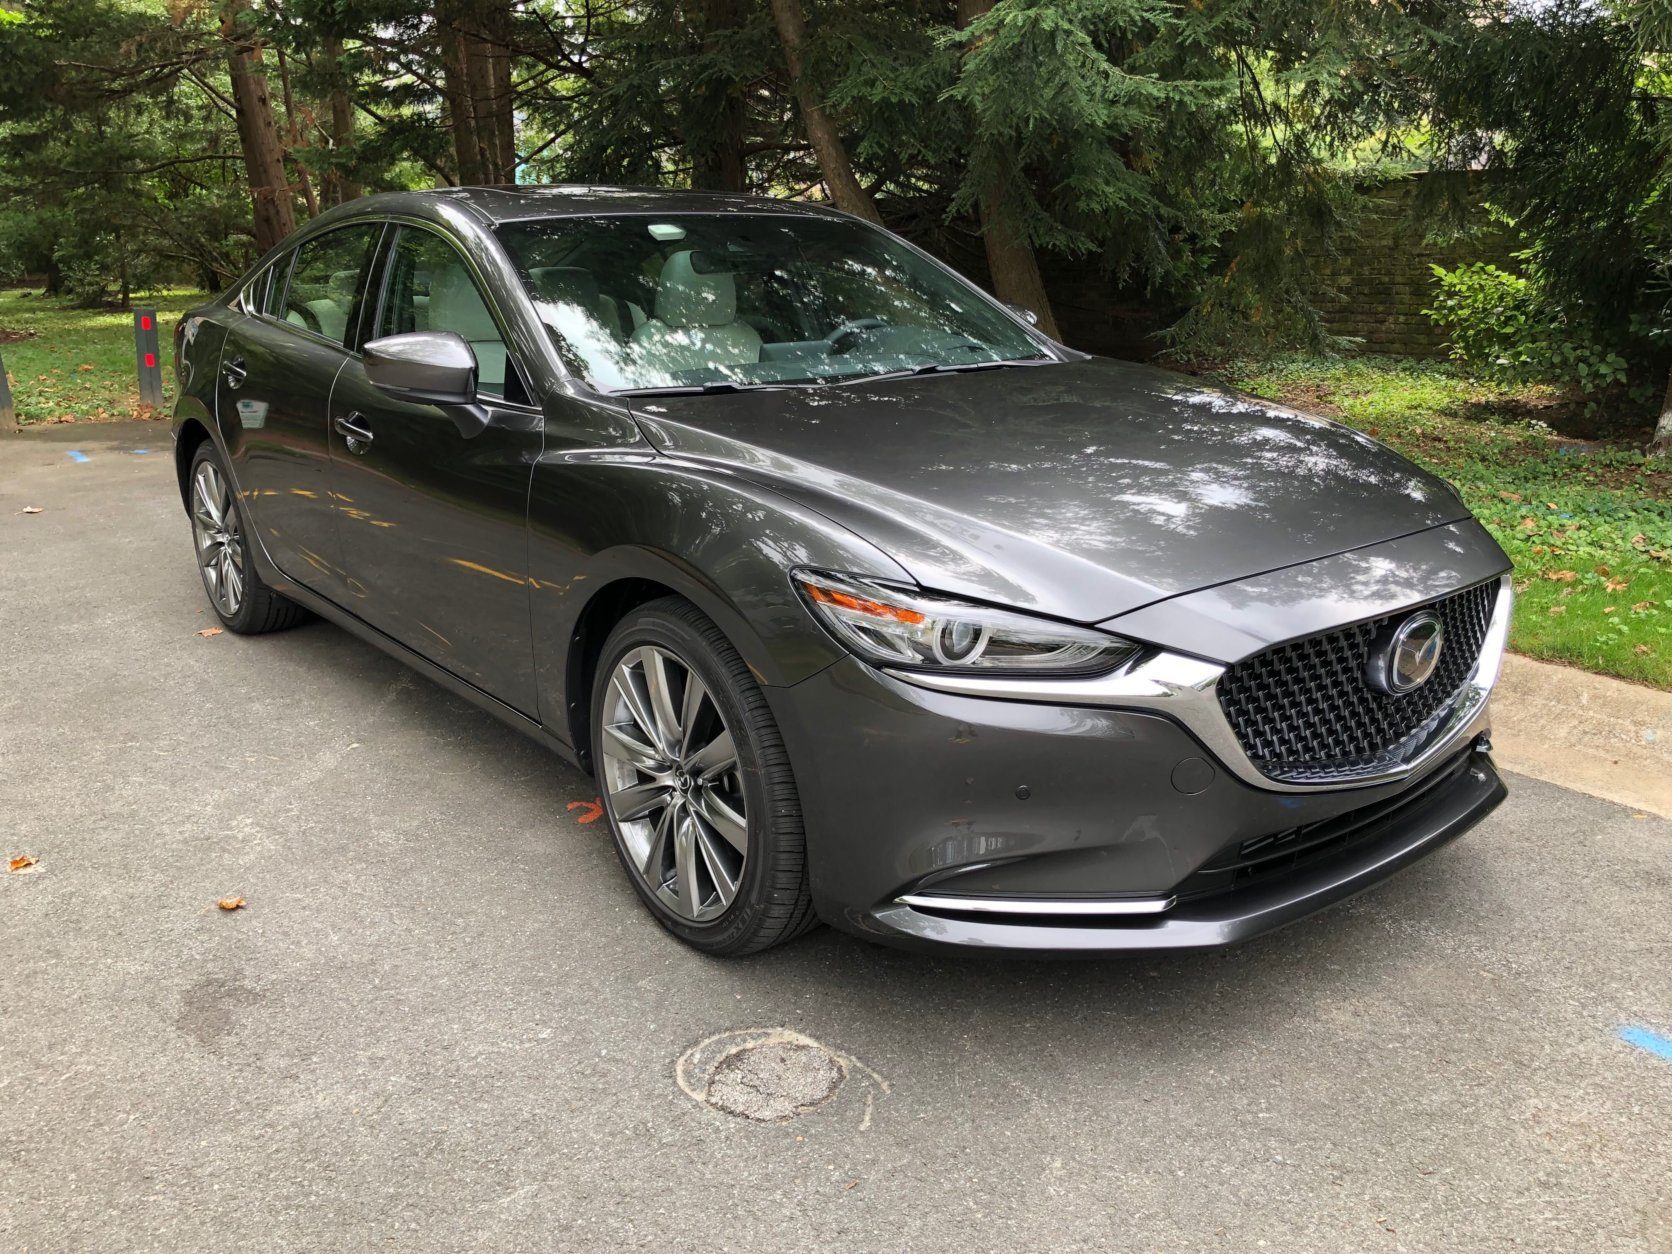 <p>Mazda has upped its game with the Mazda6 signature. The Mazda6 now has the power it’s been lacking, but its healthy 250 horsepower is achieved with top-shelf, 93 octane fuel. Horsepower drops to 227 with regular, 87 octane. The ride is sporty, without beating you up.</p>
